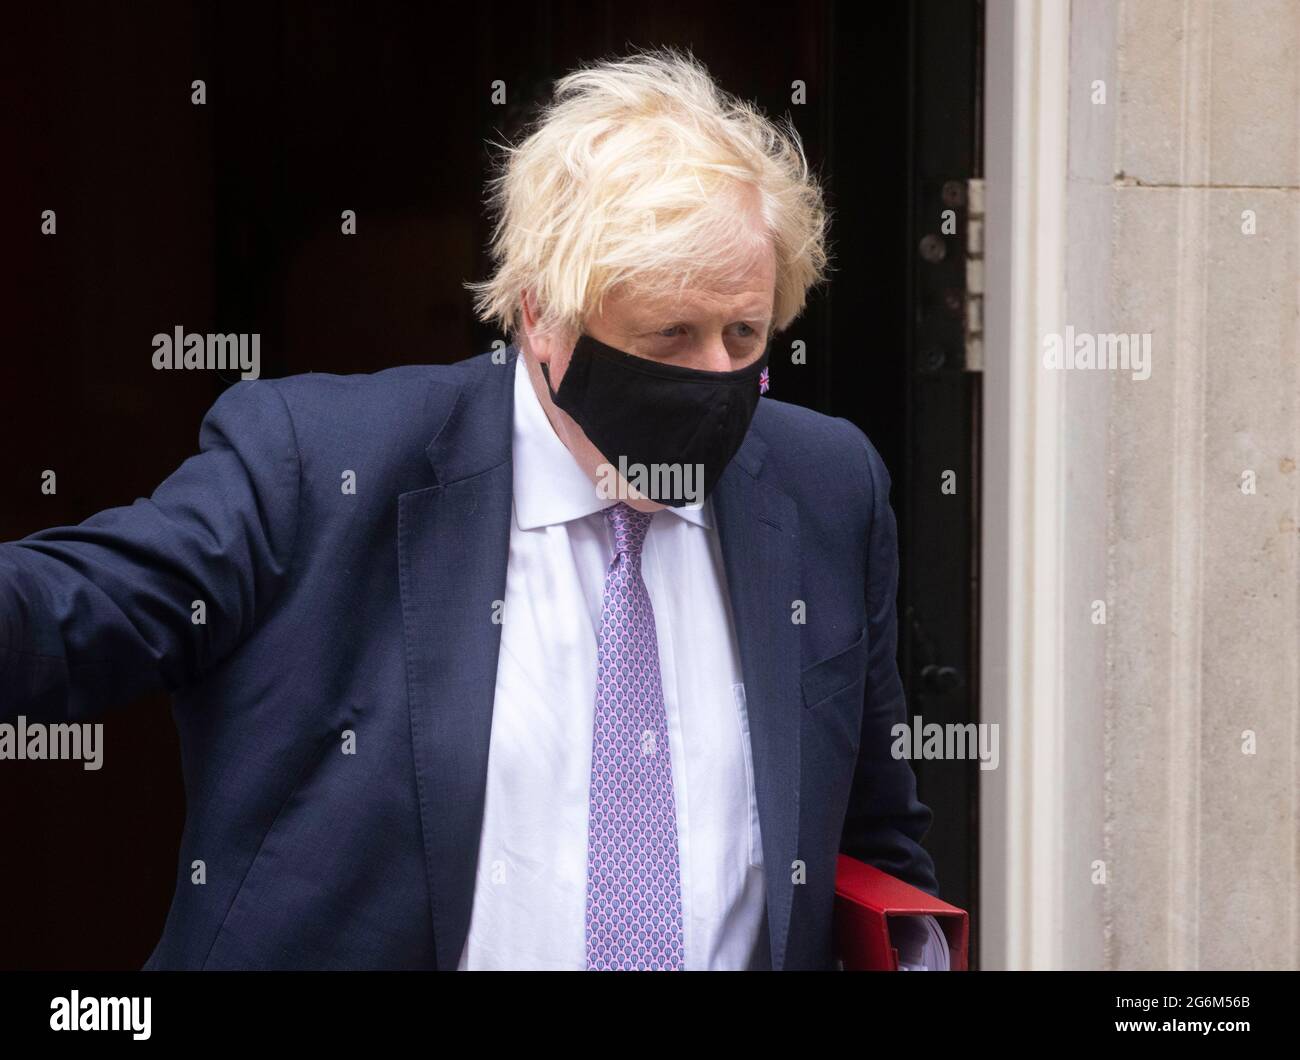 London, UK. 7th July, 2021. Prime Minister, Boris Johnson, leaves Downing Street on his way to The Houses of Parliament for Prime MinisterÕs Questions. He will face Keir Starmer across the despatch box. Credit: Mark Thomas/Alamy Live News Stock Photo